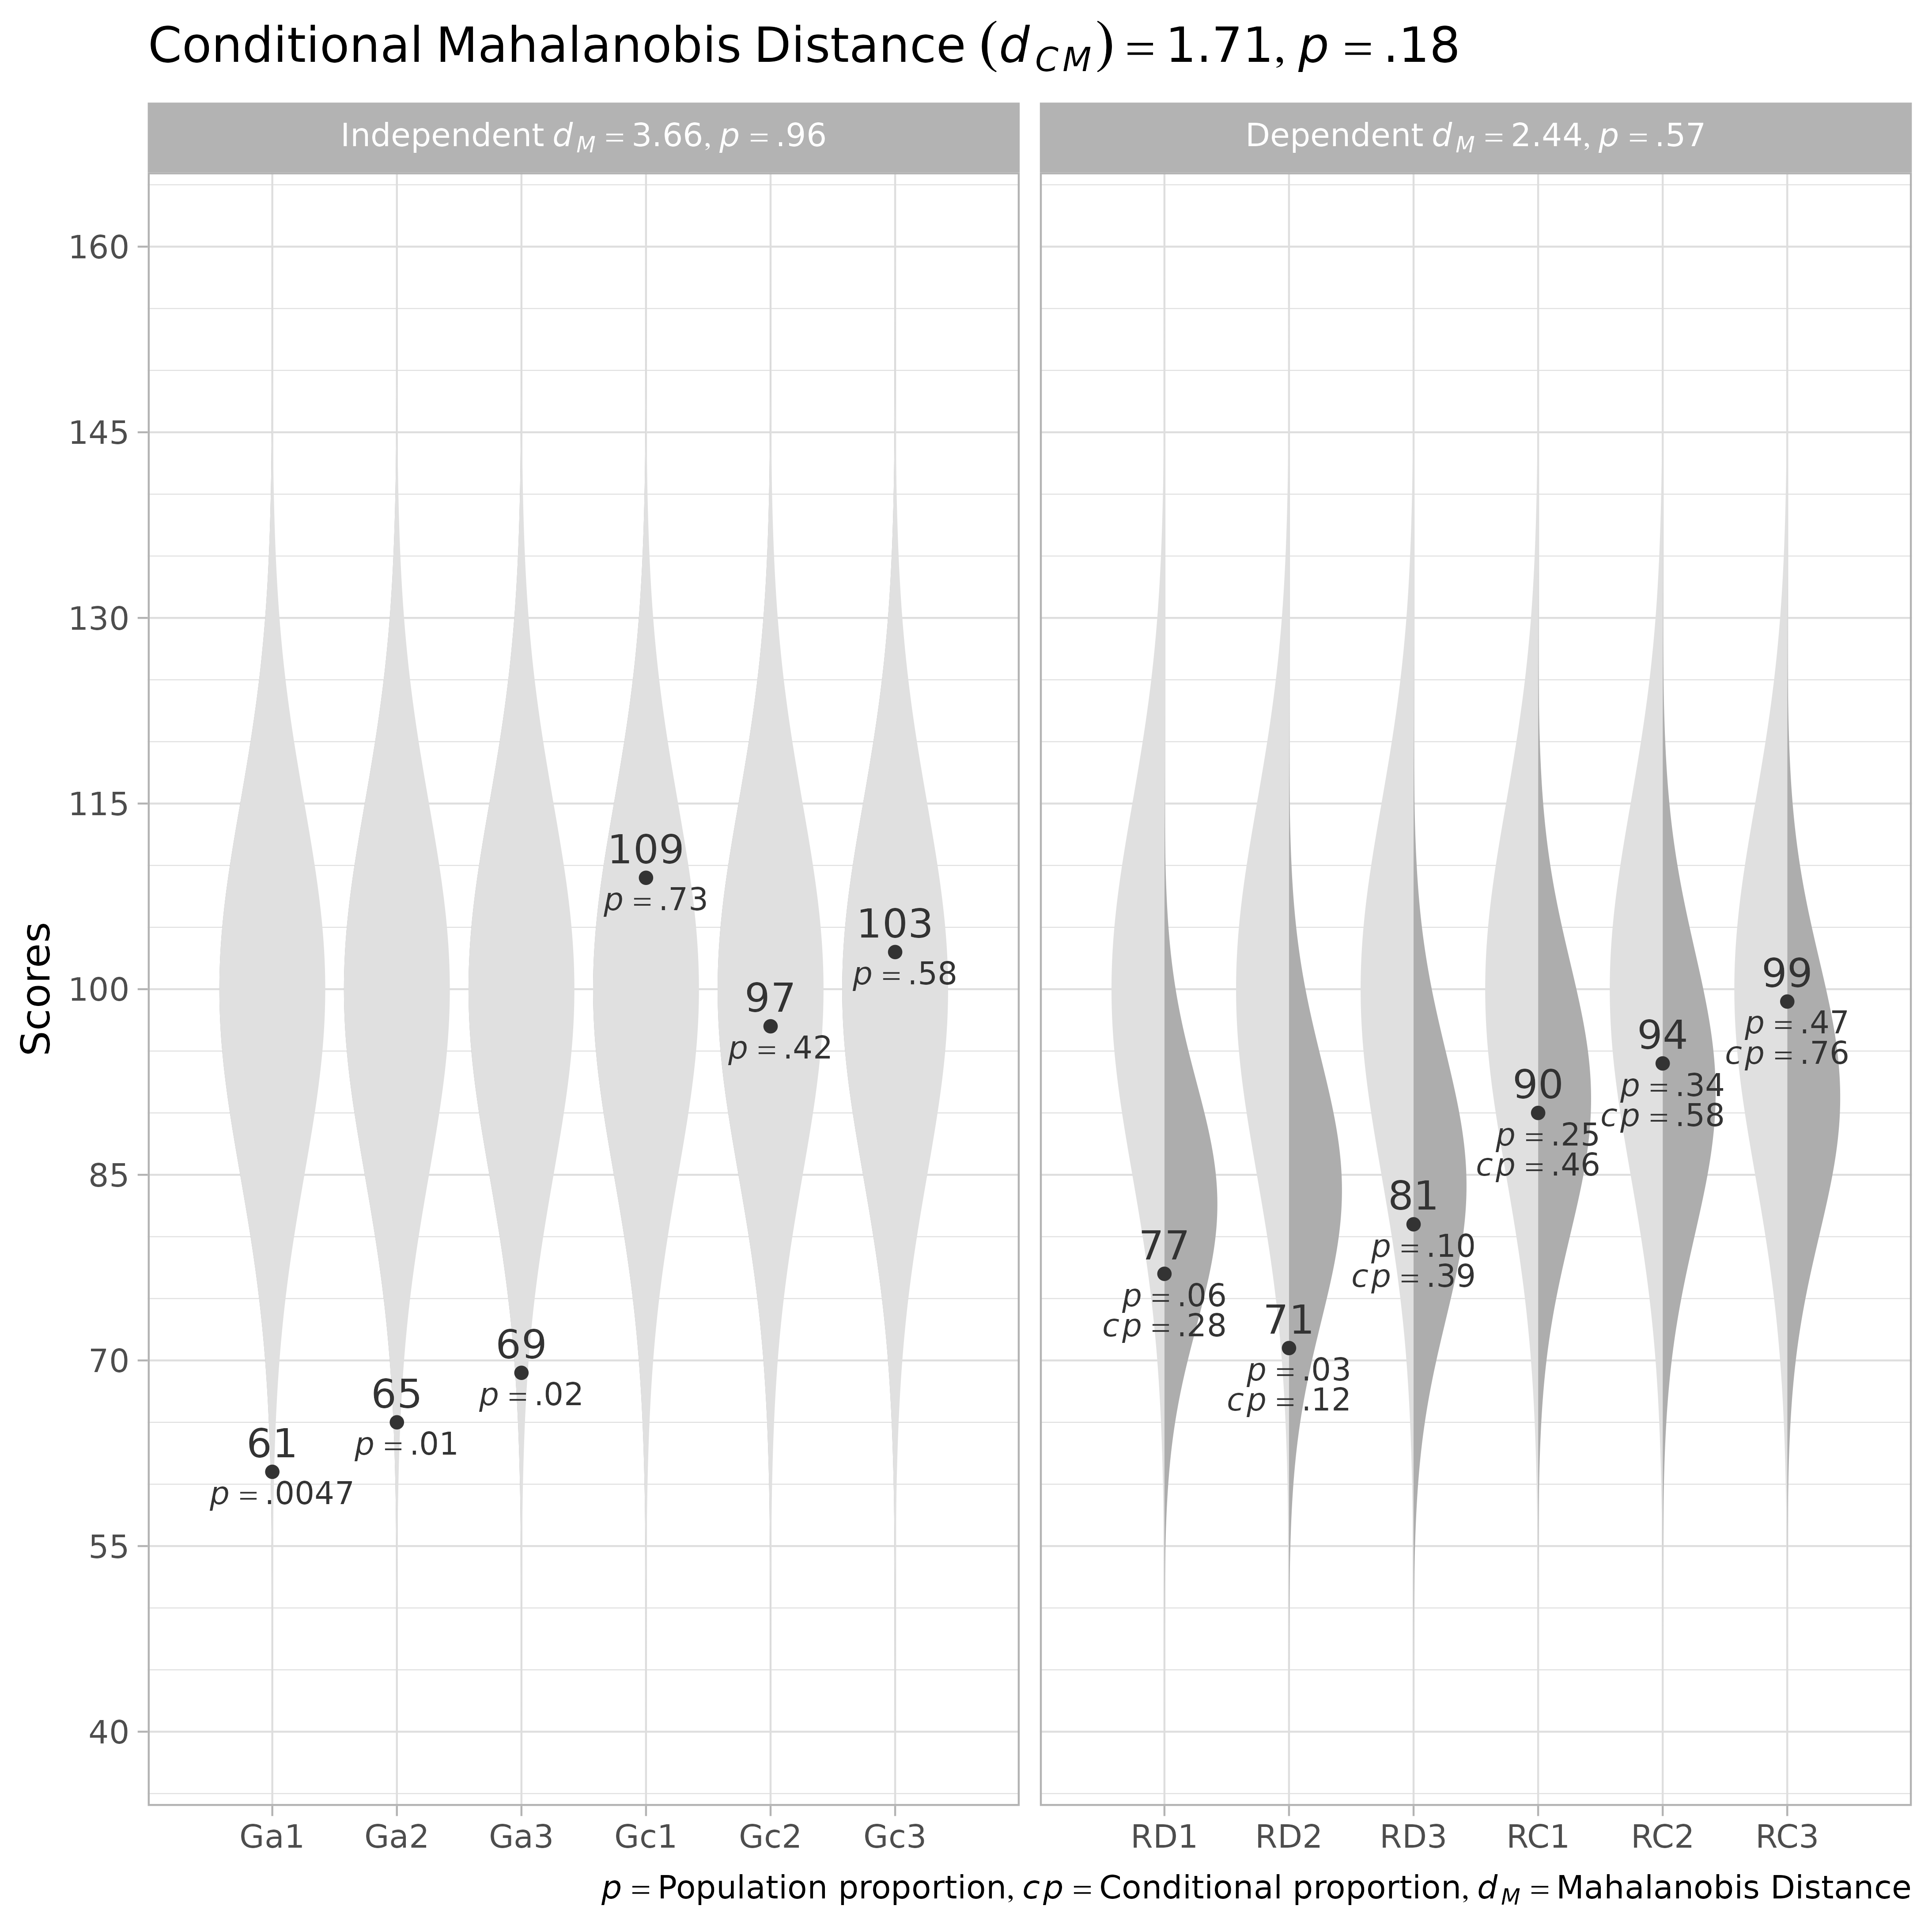 Conditional Distributions for Reading, Controlling for Cognitive Predictors